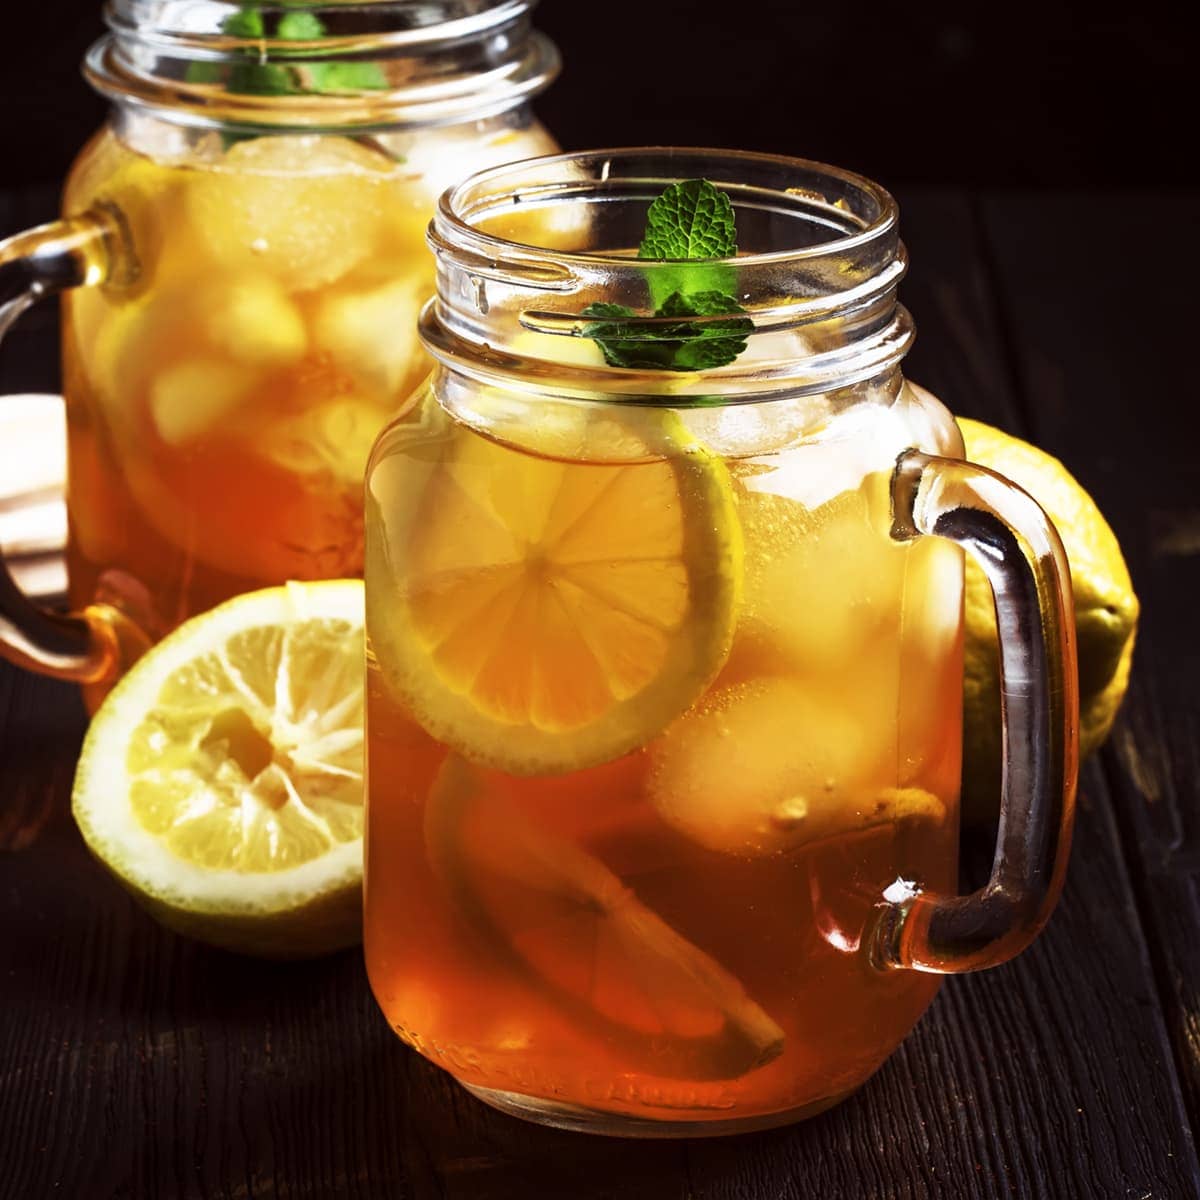 Make your own Iced Tea